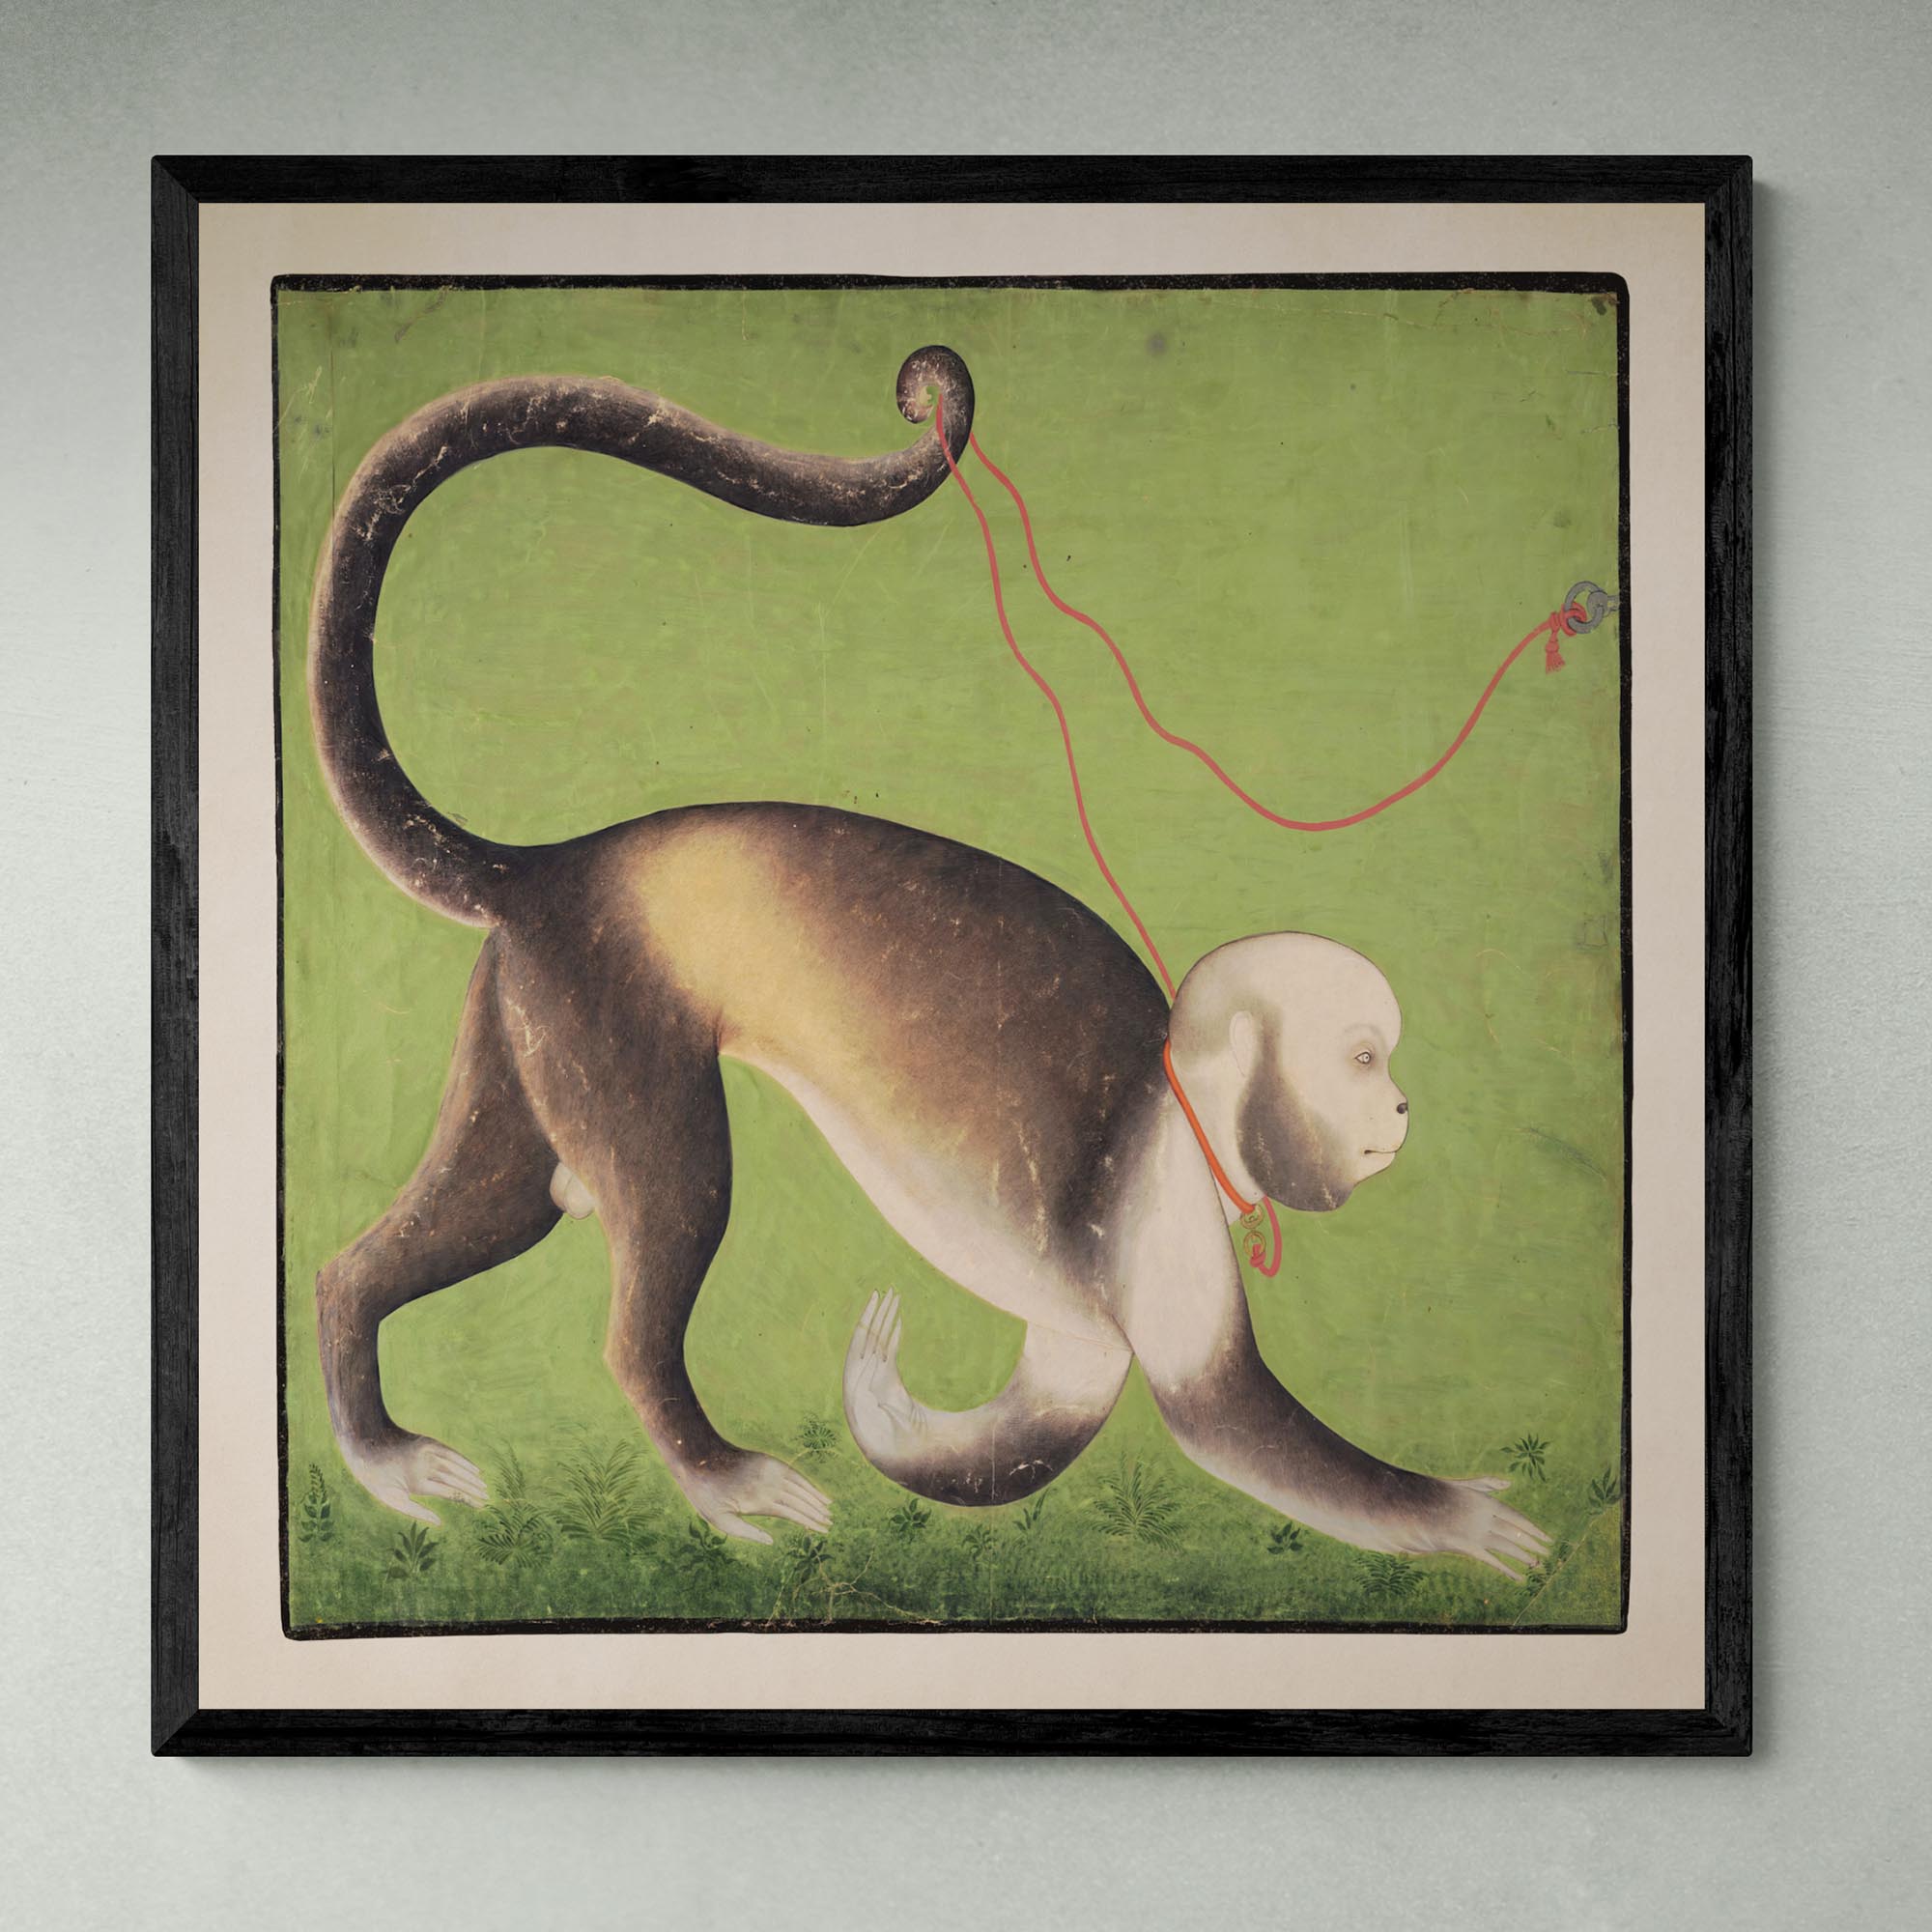 giclee 6"x6" A Monumental Portrait of a Monkey, Rajasthan, Antique India Ape Surreal Asian Green Woodblock Fine Art Print